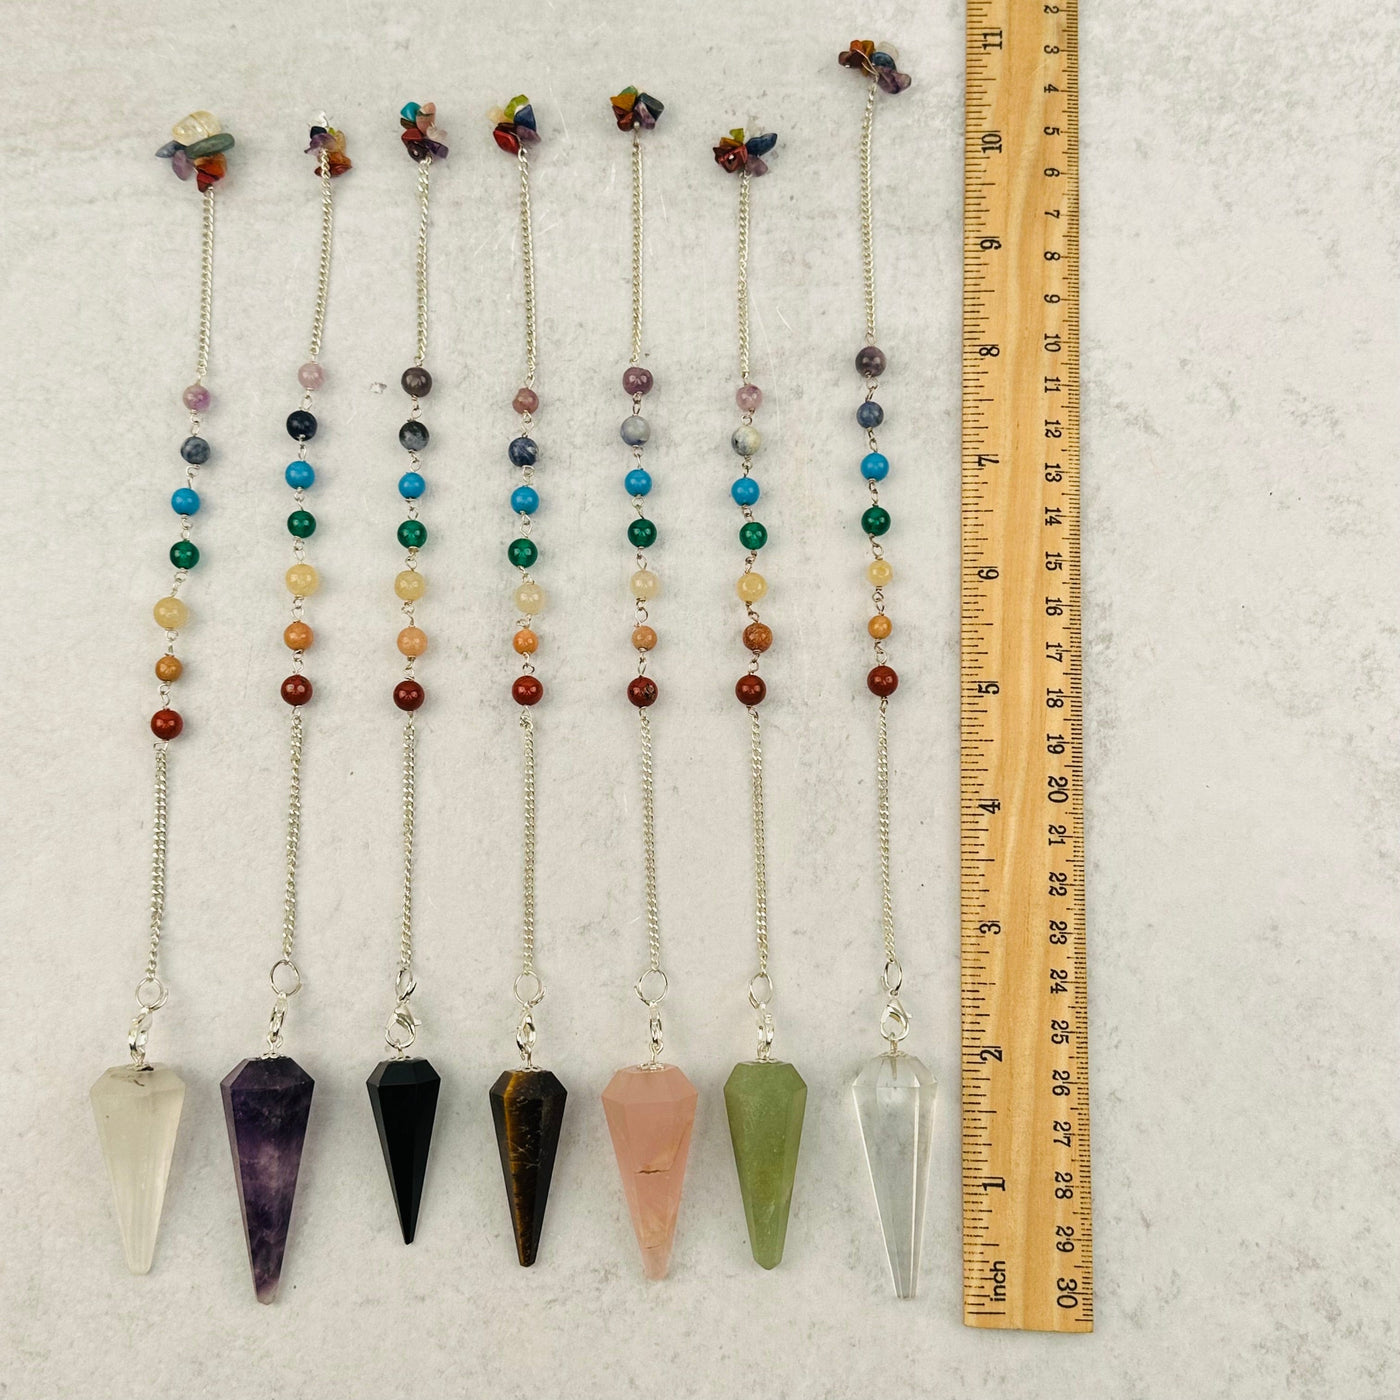 Crystal Pendulum on Chakra Chain next to a ruler for size reference 